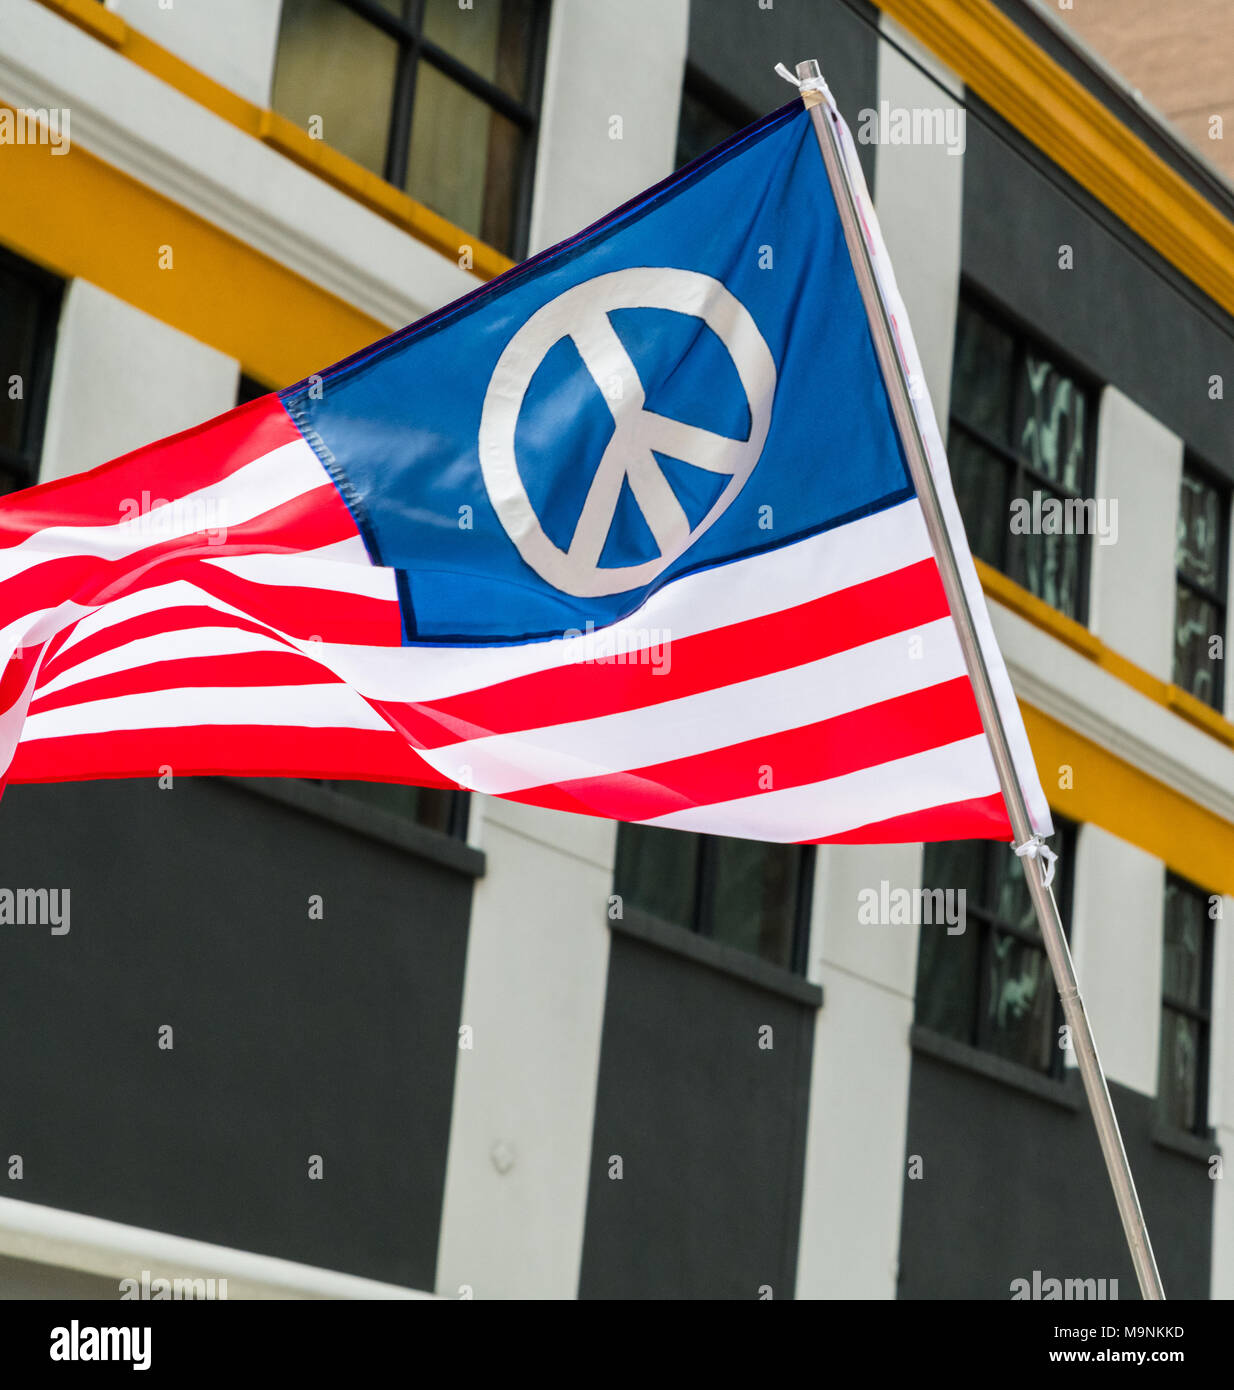 An American flag designed with a peace symbol flies during the March For Our Lives protests in Houston Stock Photo